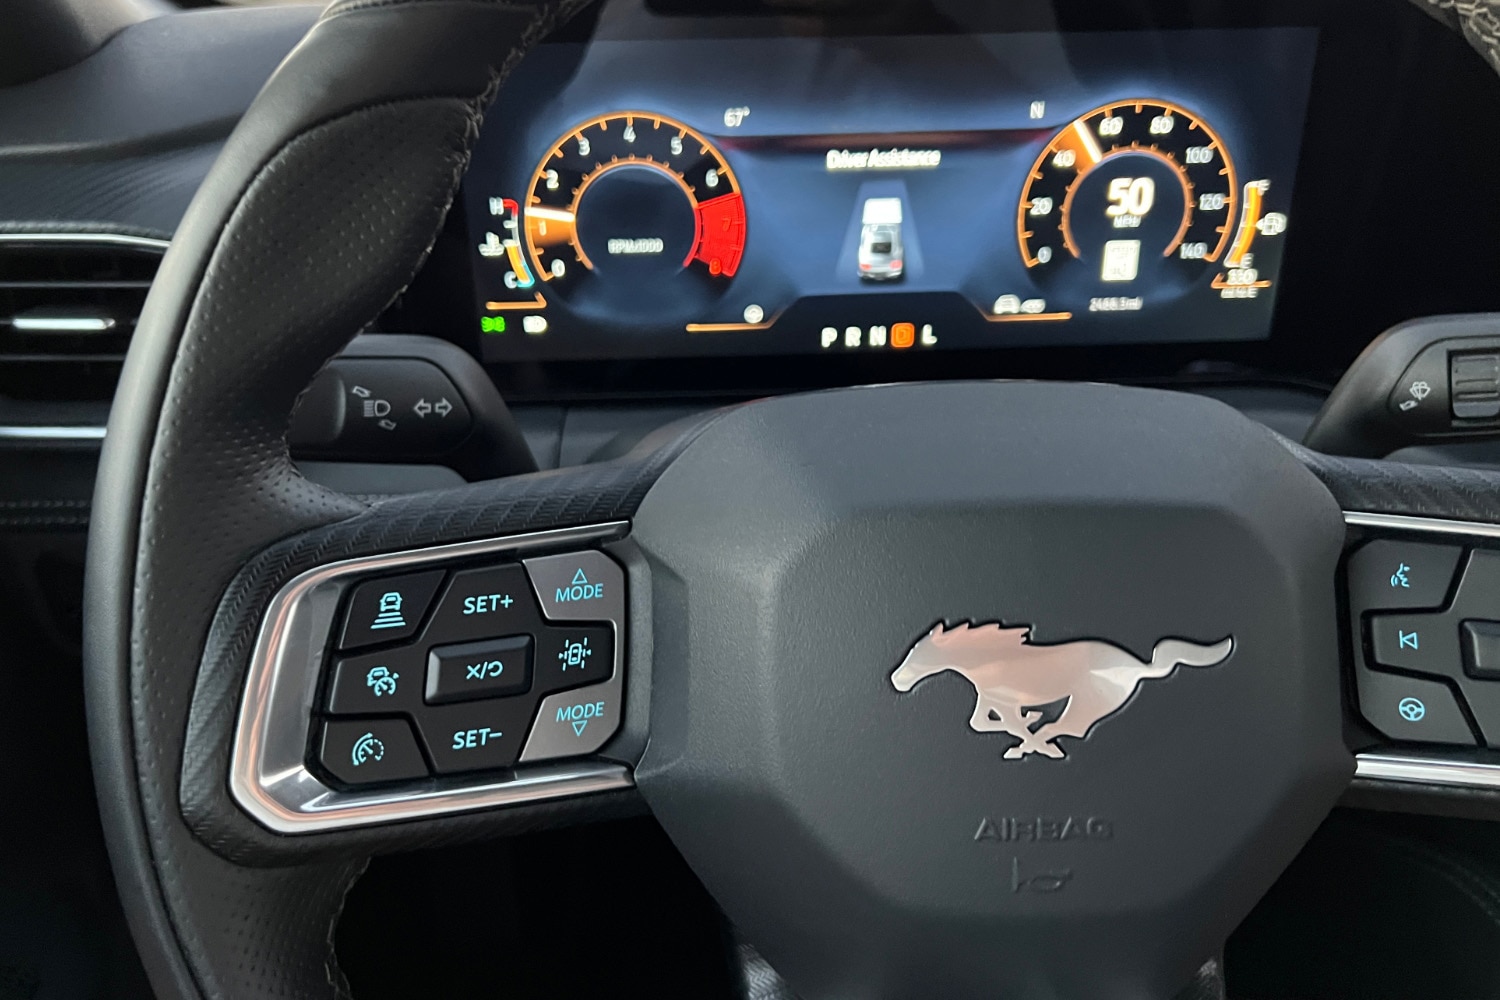  2024 Ford Mustang steering wheel and spoke controls in front of a blurry instrument cluster screen showing its driver-assistance display mode.